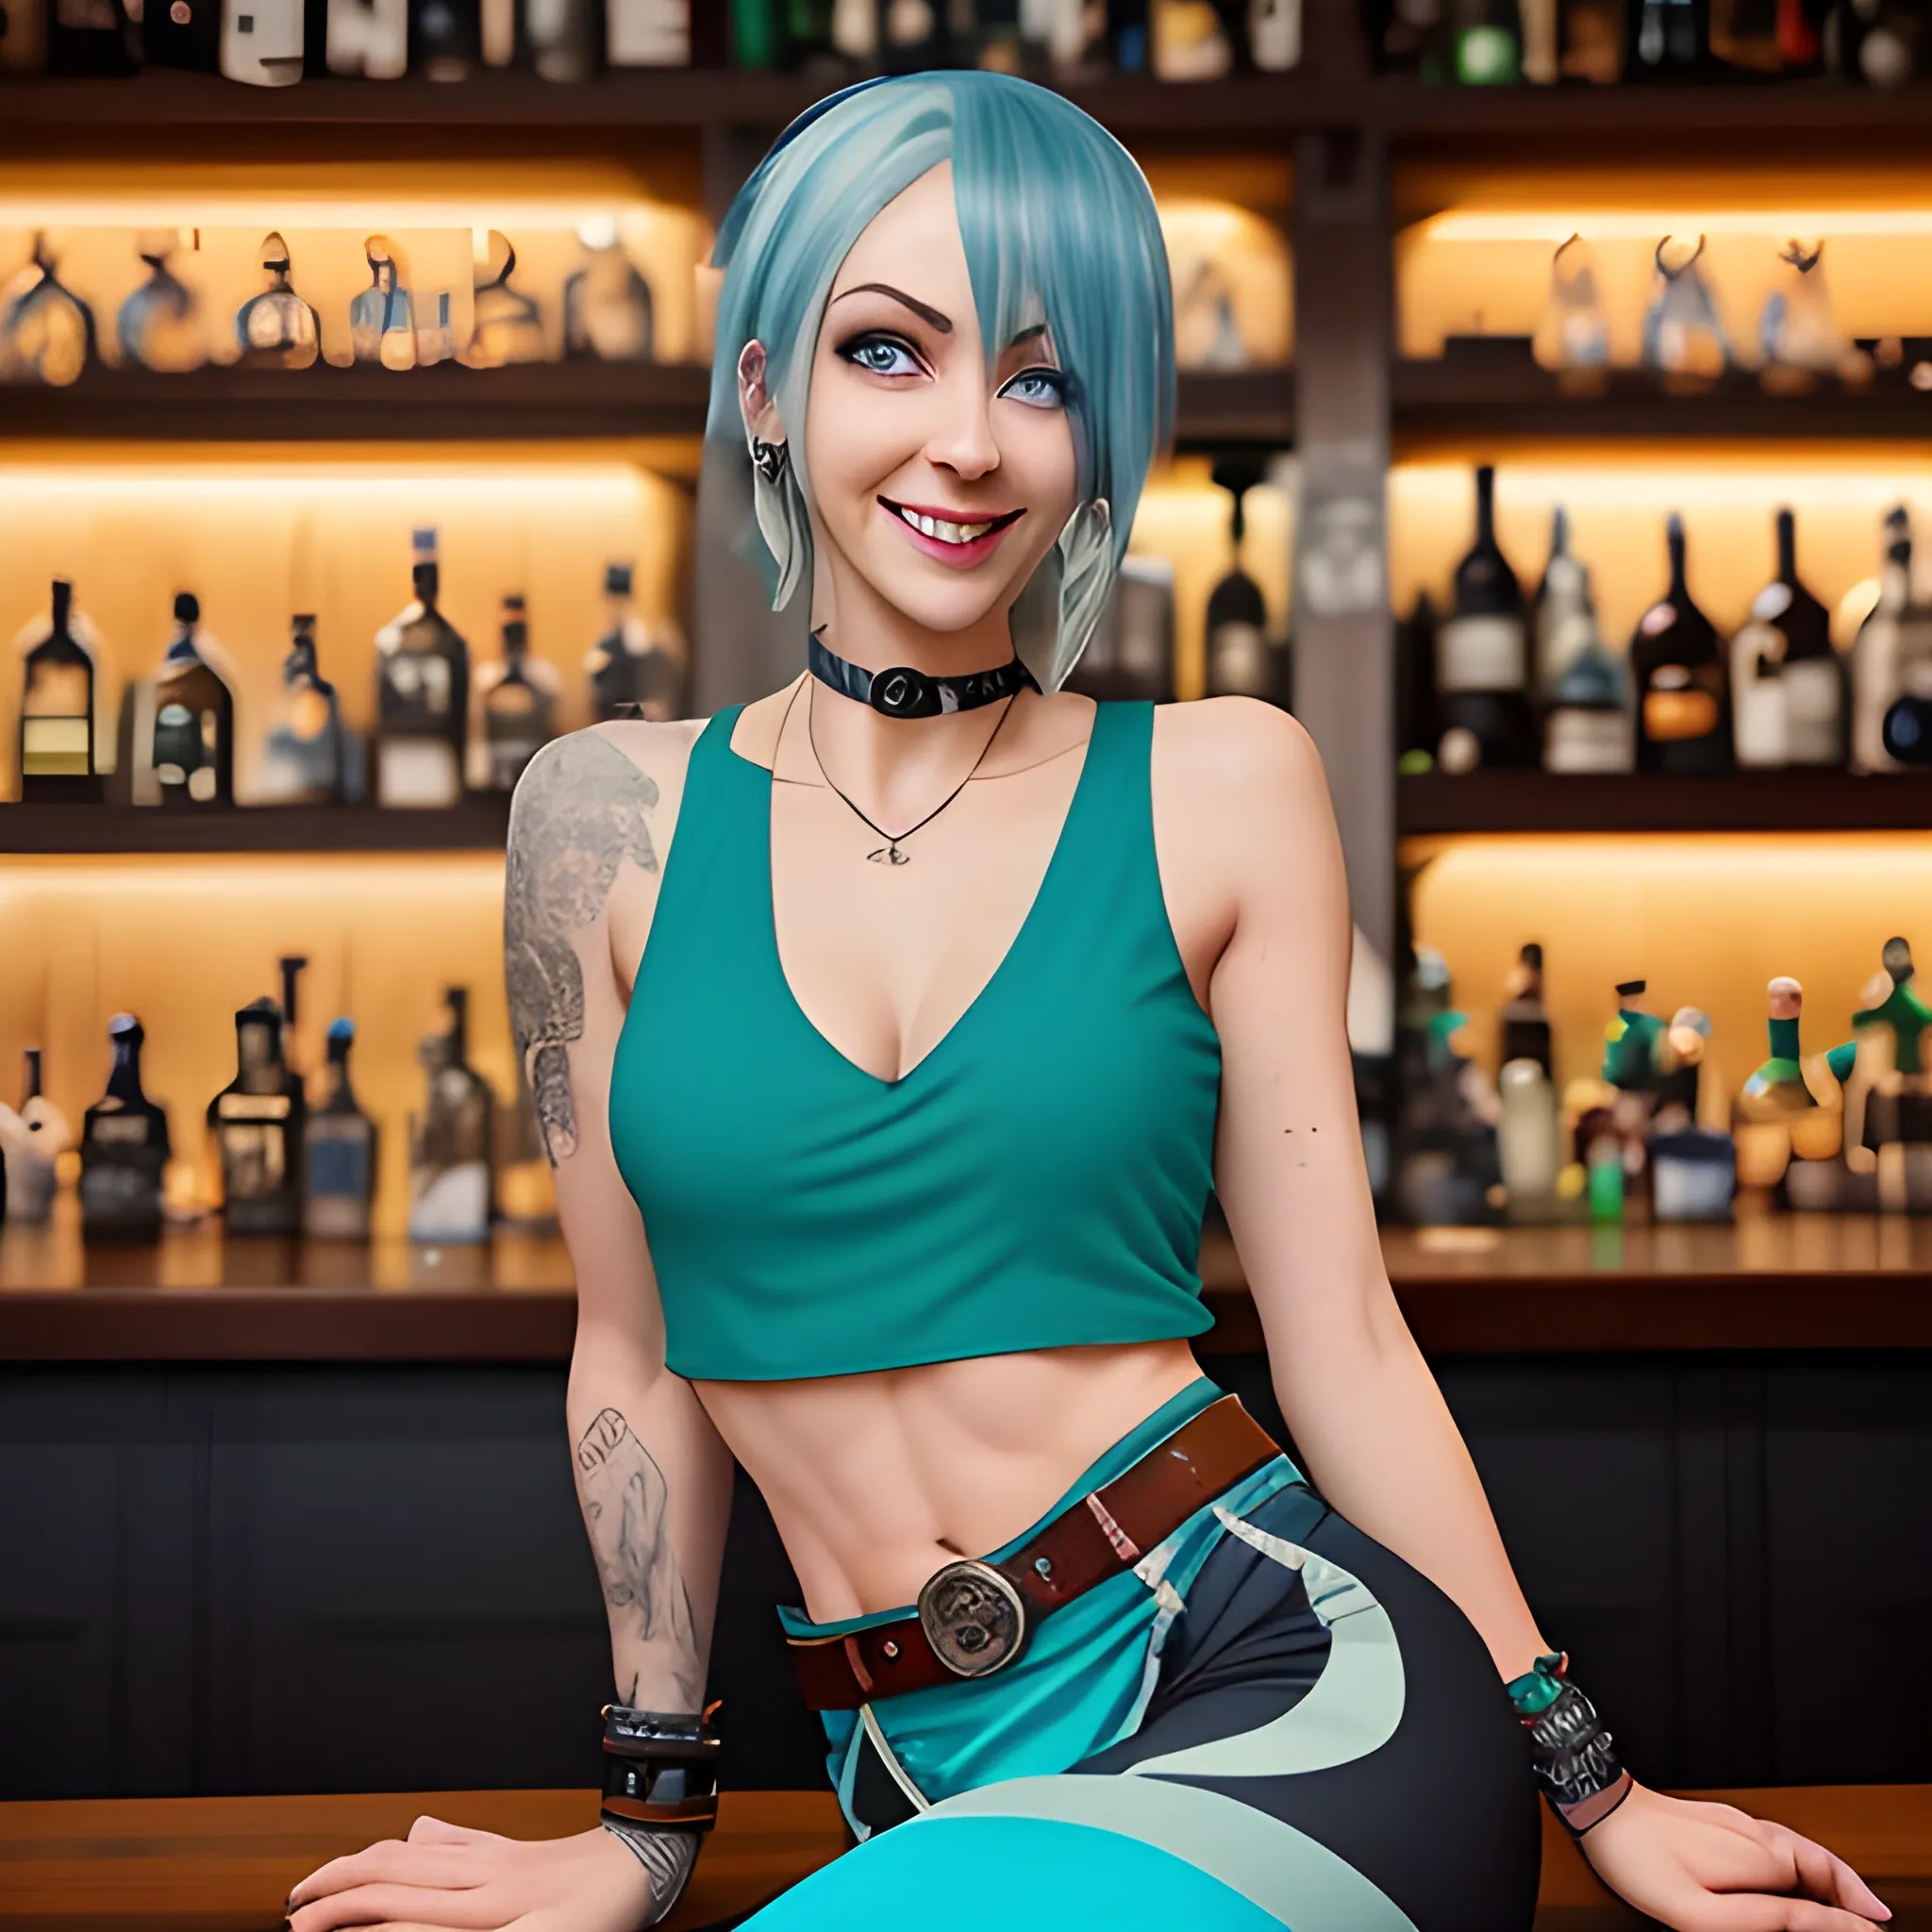 full body in frame.   . female blue hair. light skin.  tall,  athletic, amulet, leggings,   shoulderless top with cut out sides, plunging neck line, round face, green eyes.  . smiling.  belt. sitting at bar. pierced navel. dangling earrings.  dark library. back lit